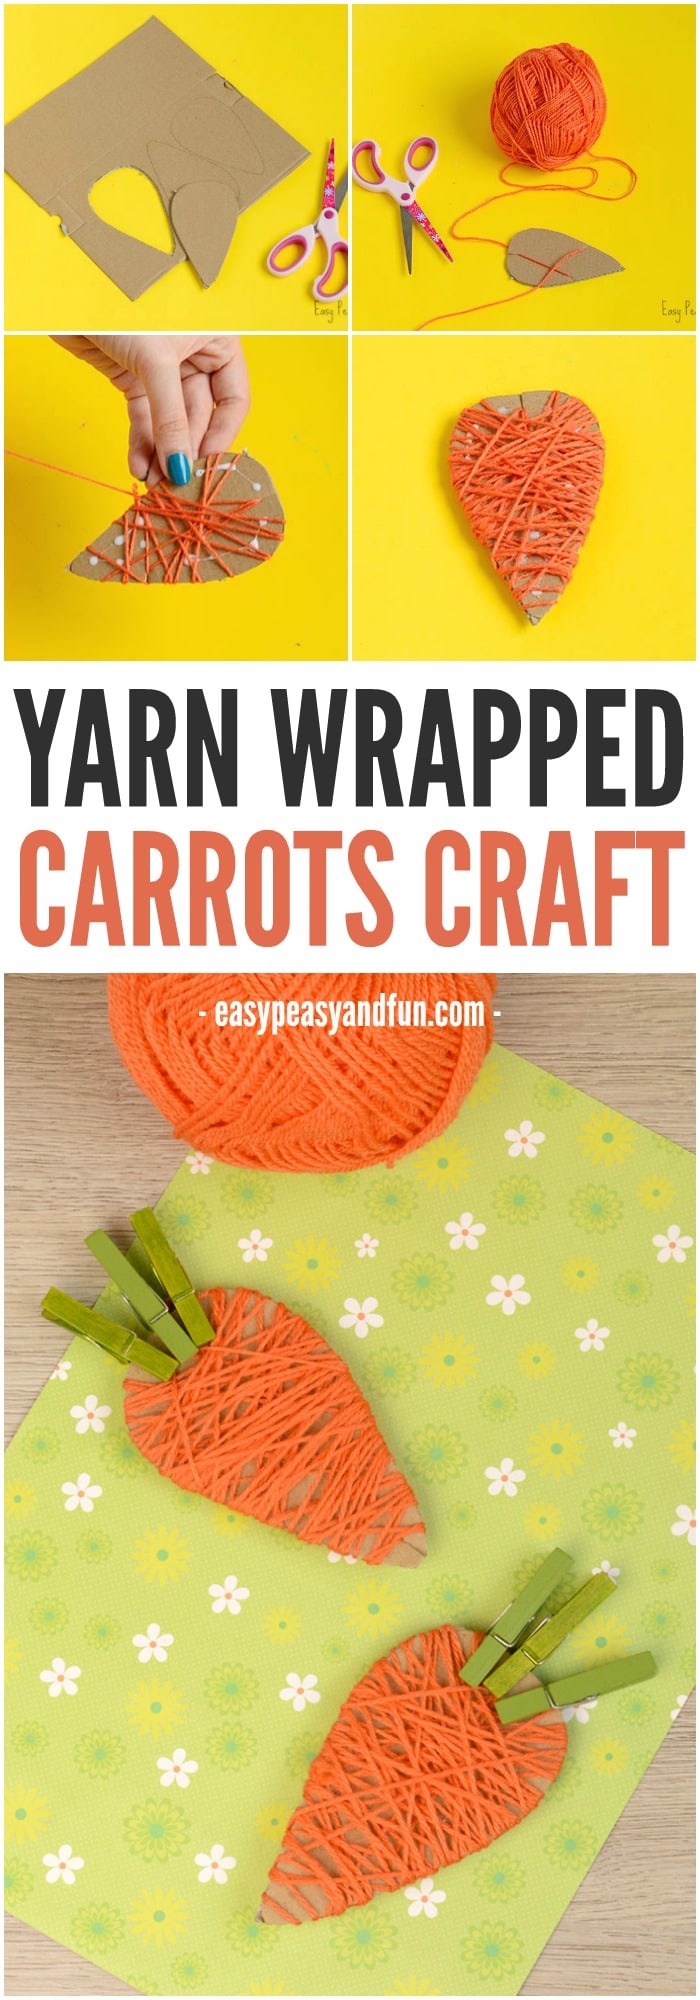 Easy Yarn Wrapped Carrots Craft for Kids